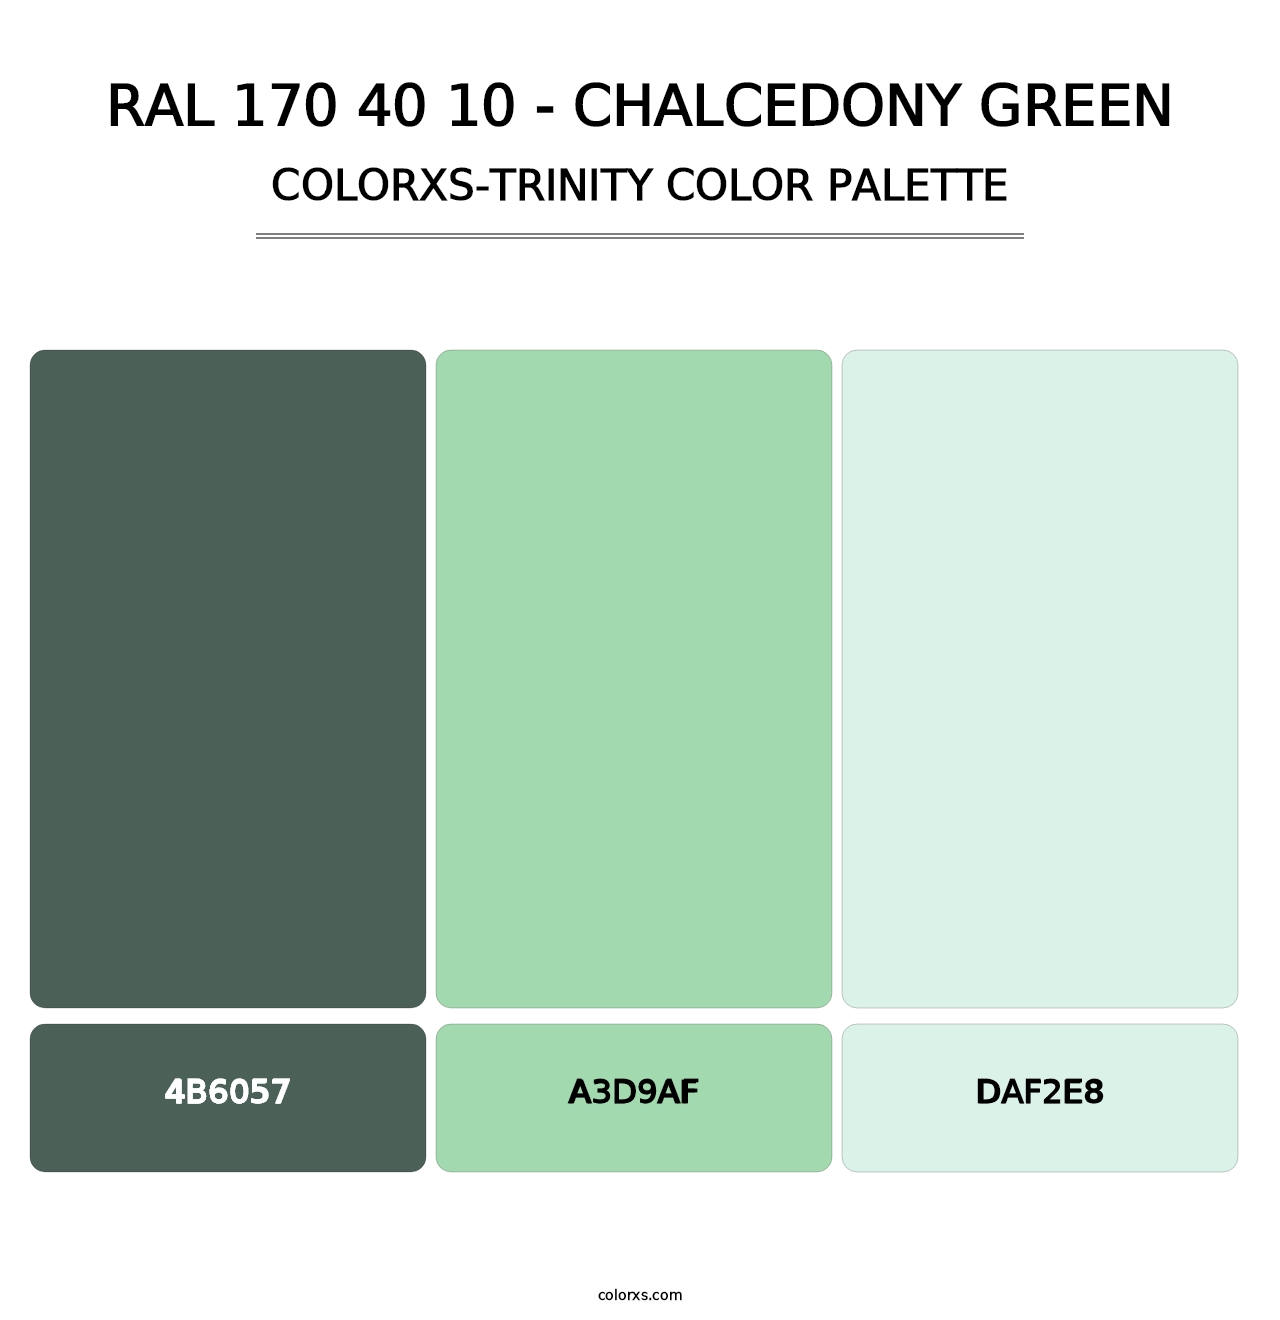 RAL 170 40 10 - Chalcedony Green - Colorxs Trinity Palette